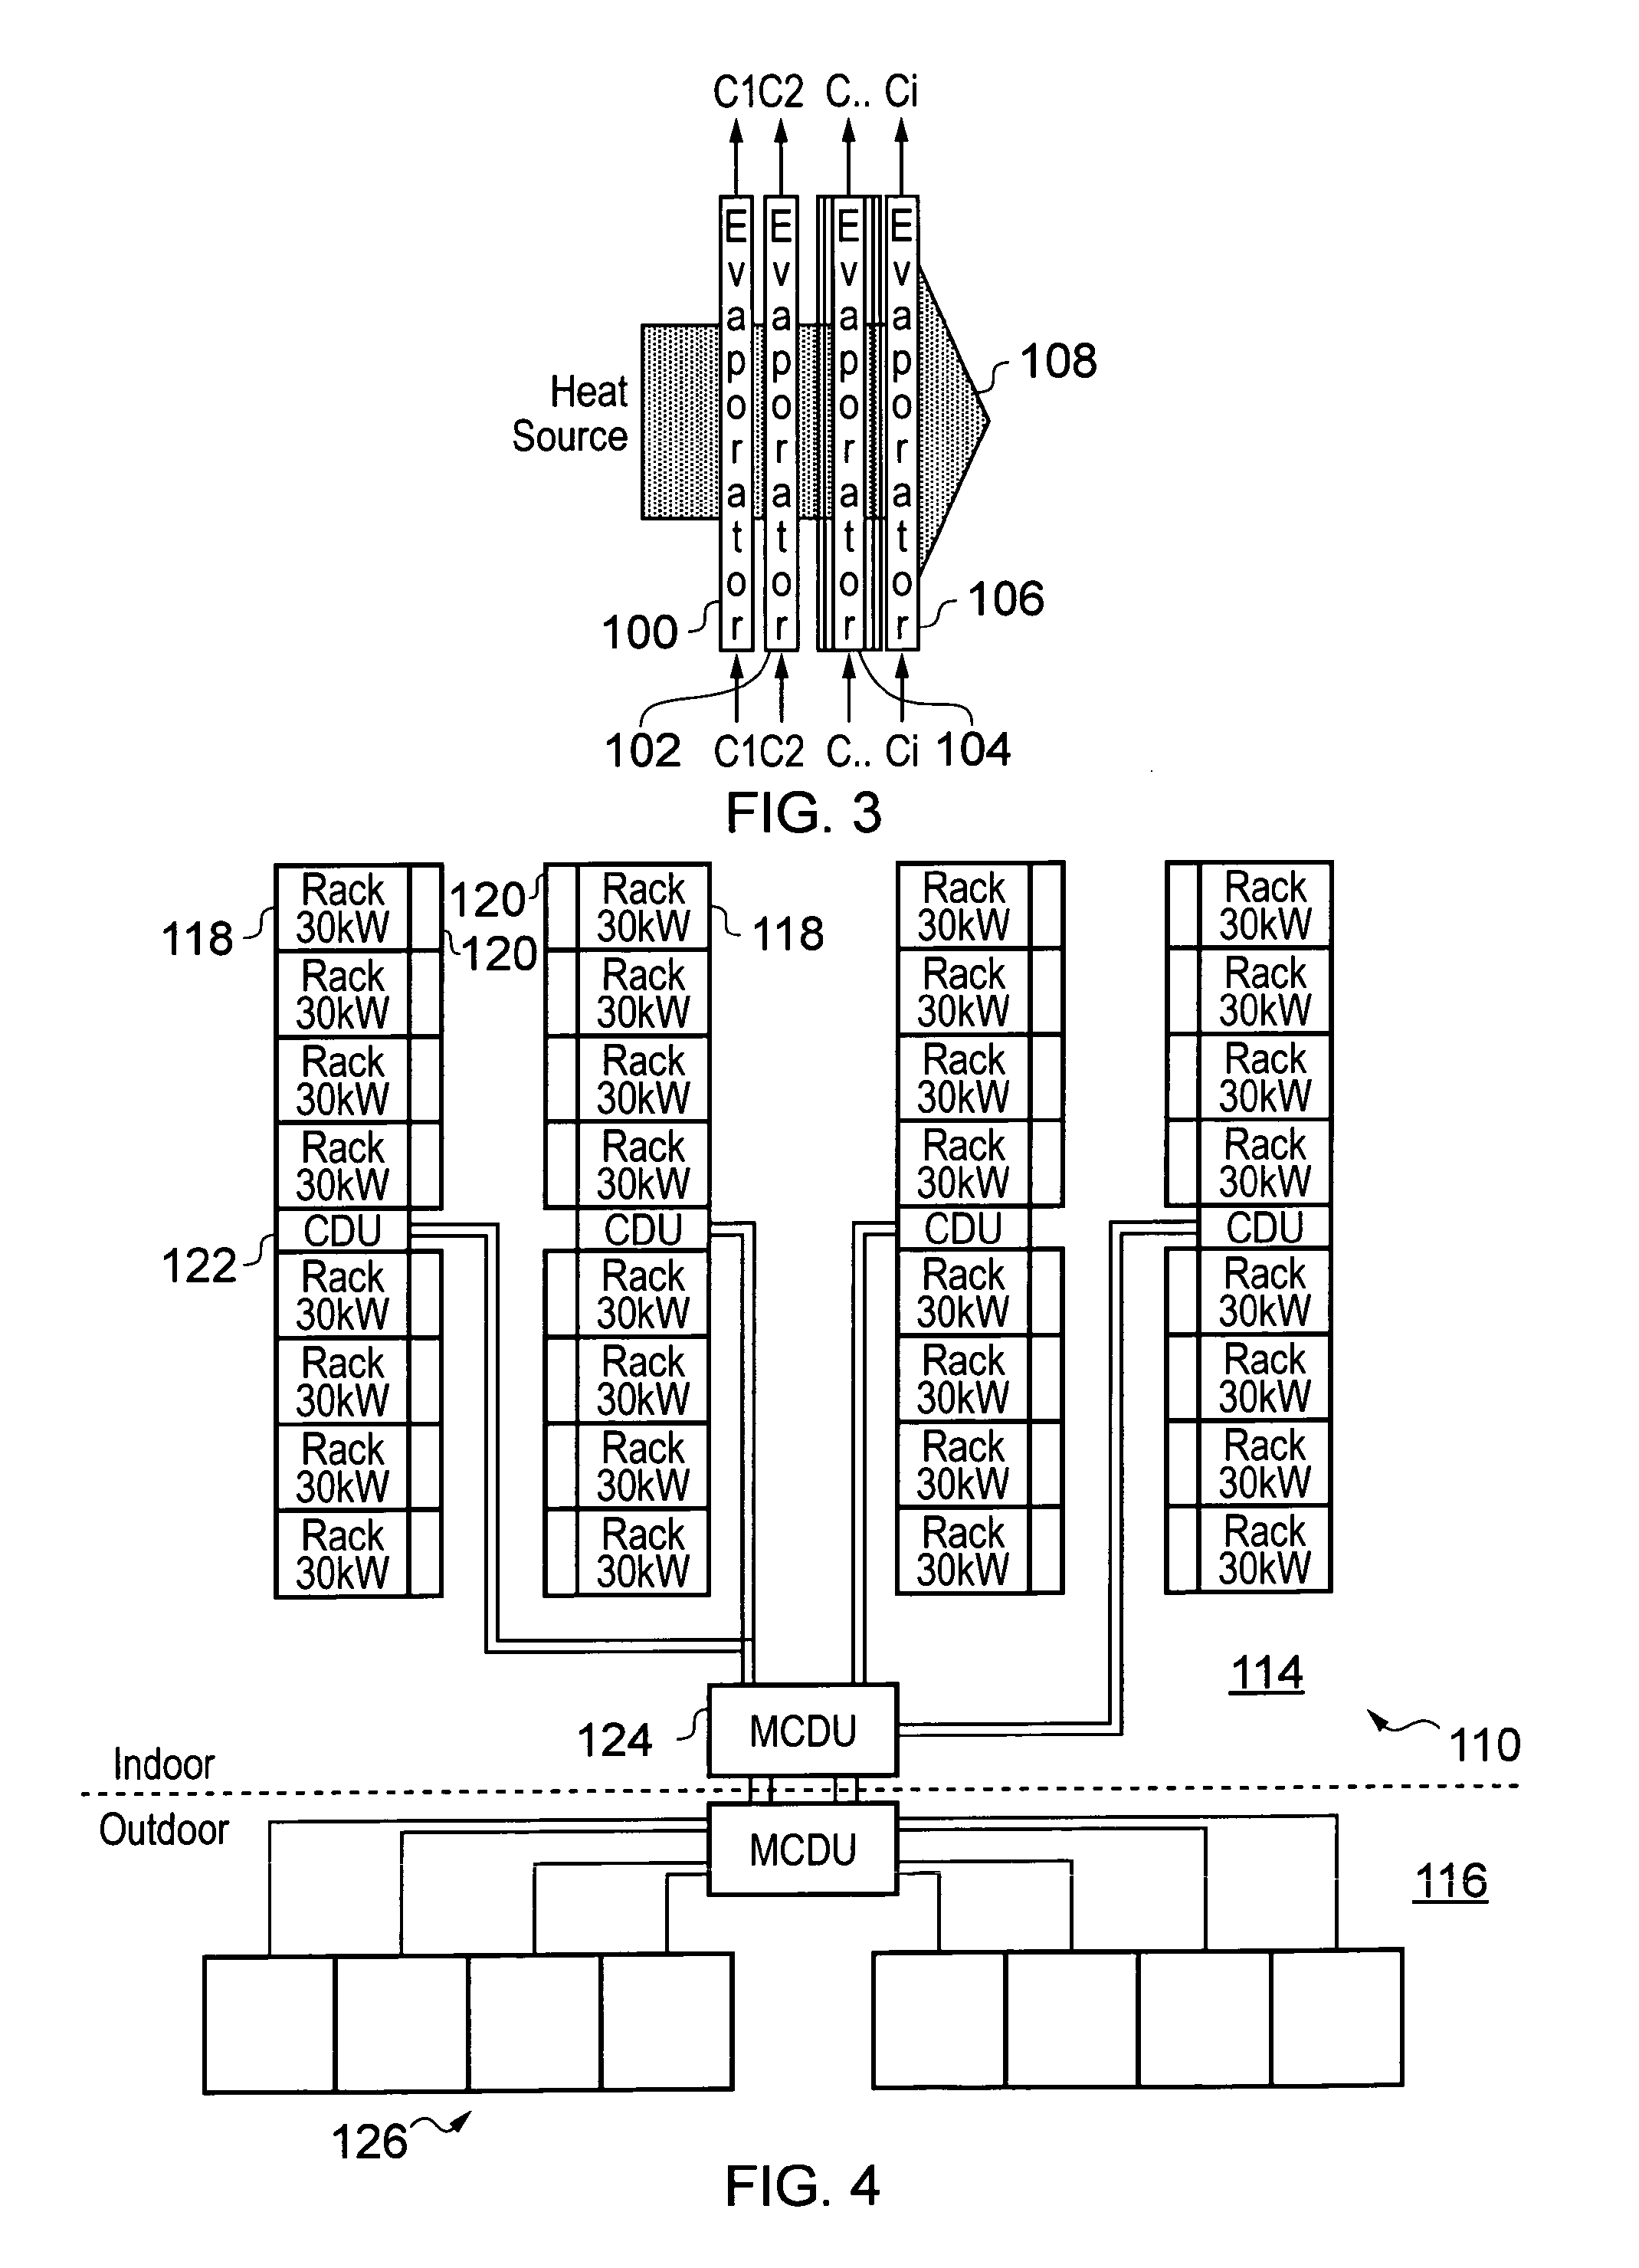 Cooling apparatus and method